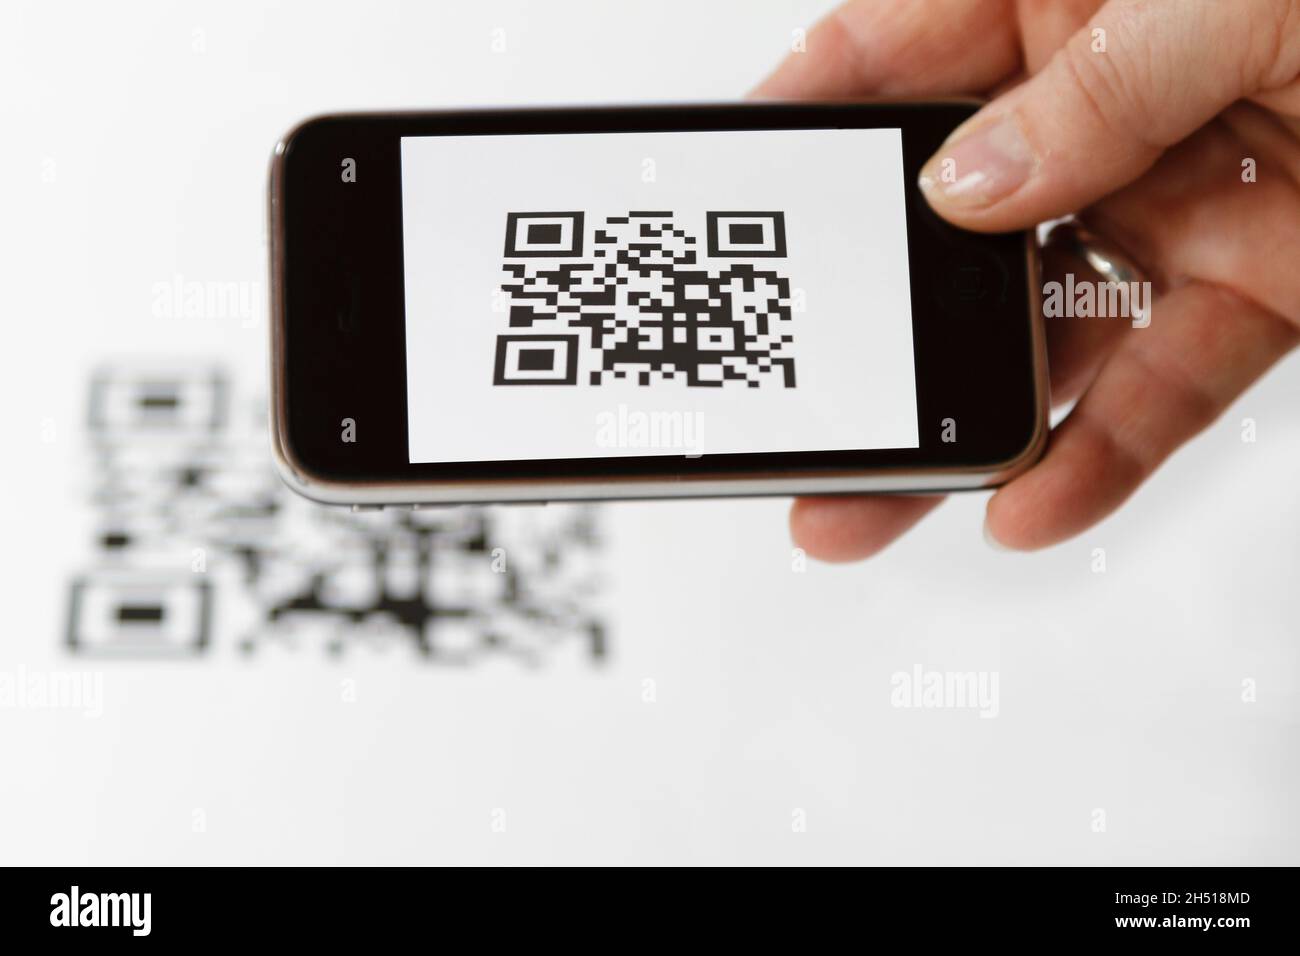 A cellphone in hand while scanning a QR code Stock Photo